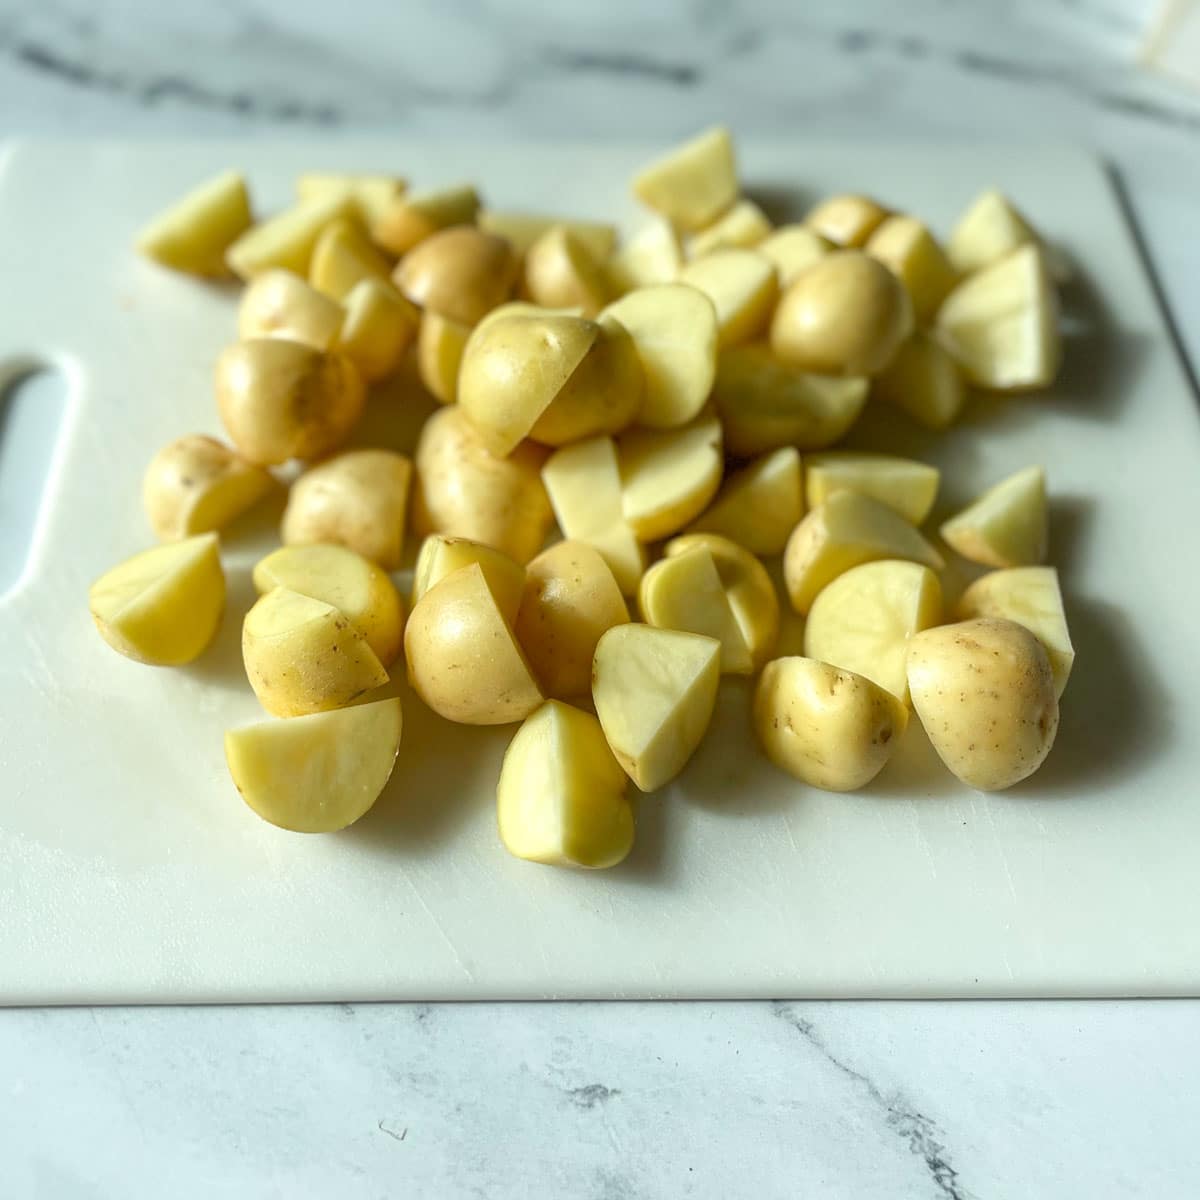 Baby yellow potatoes are cut into quarters.